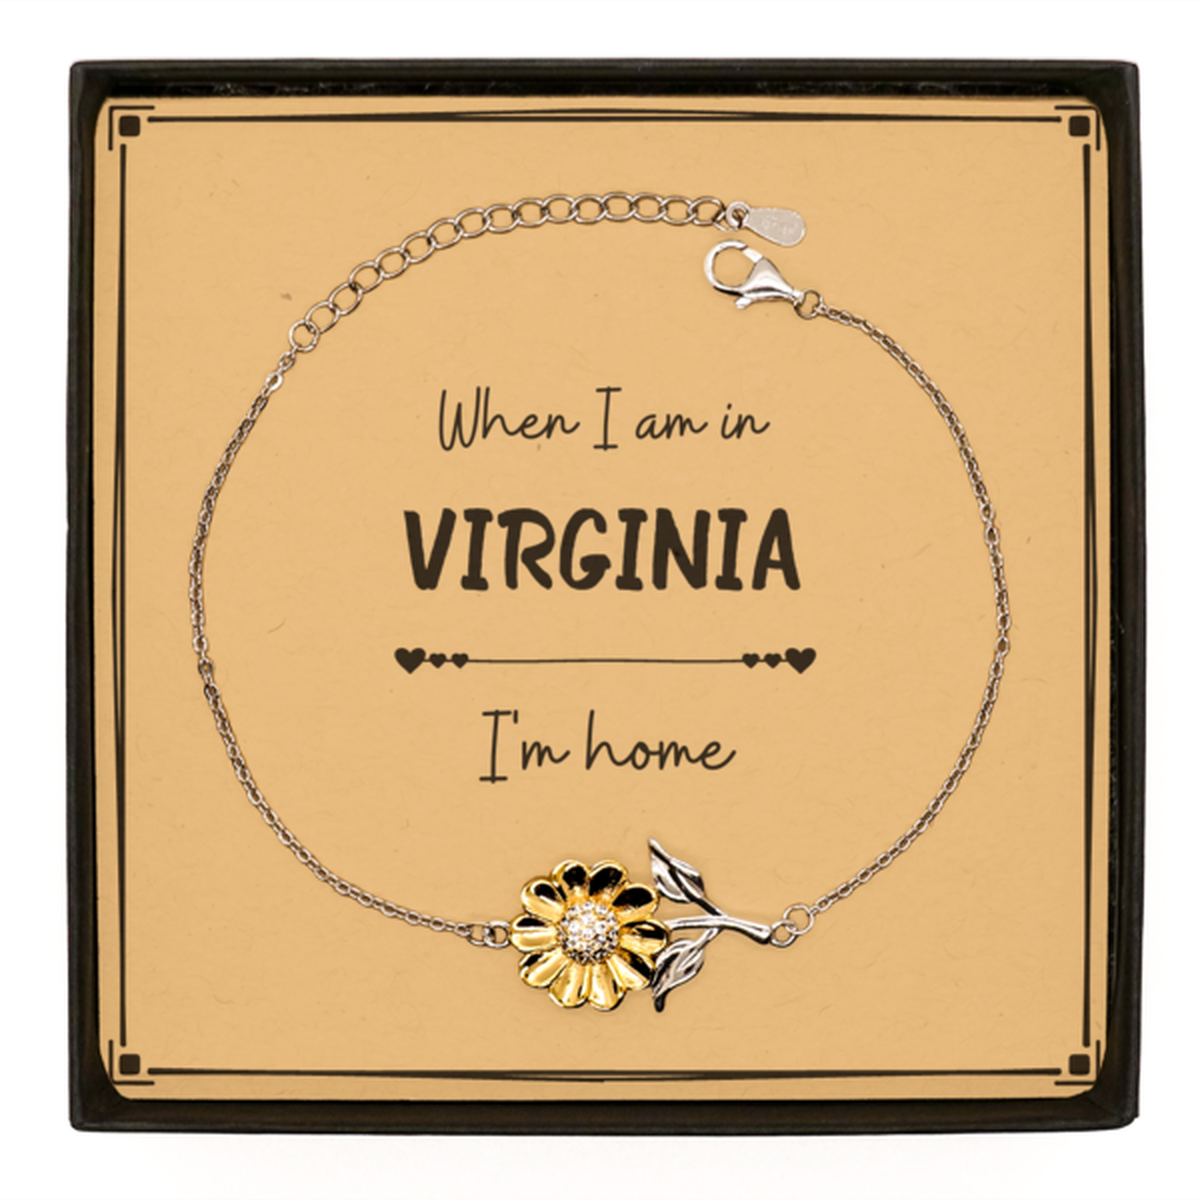 When I am in Virginia I'm home Sunflower Bracelet, Message Card Gifts For Virginia, State Virginia Birthday Gifts for Friends Coworker